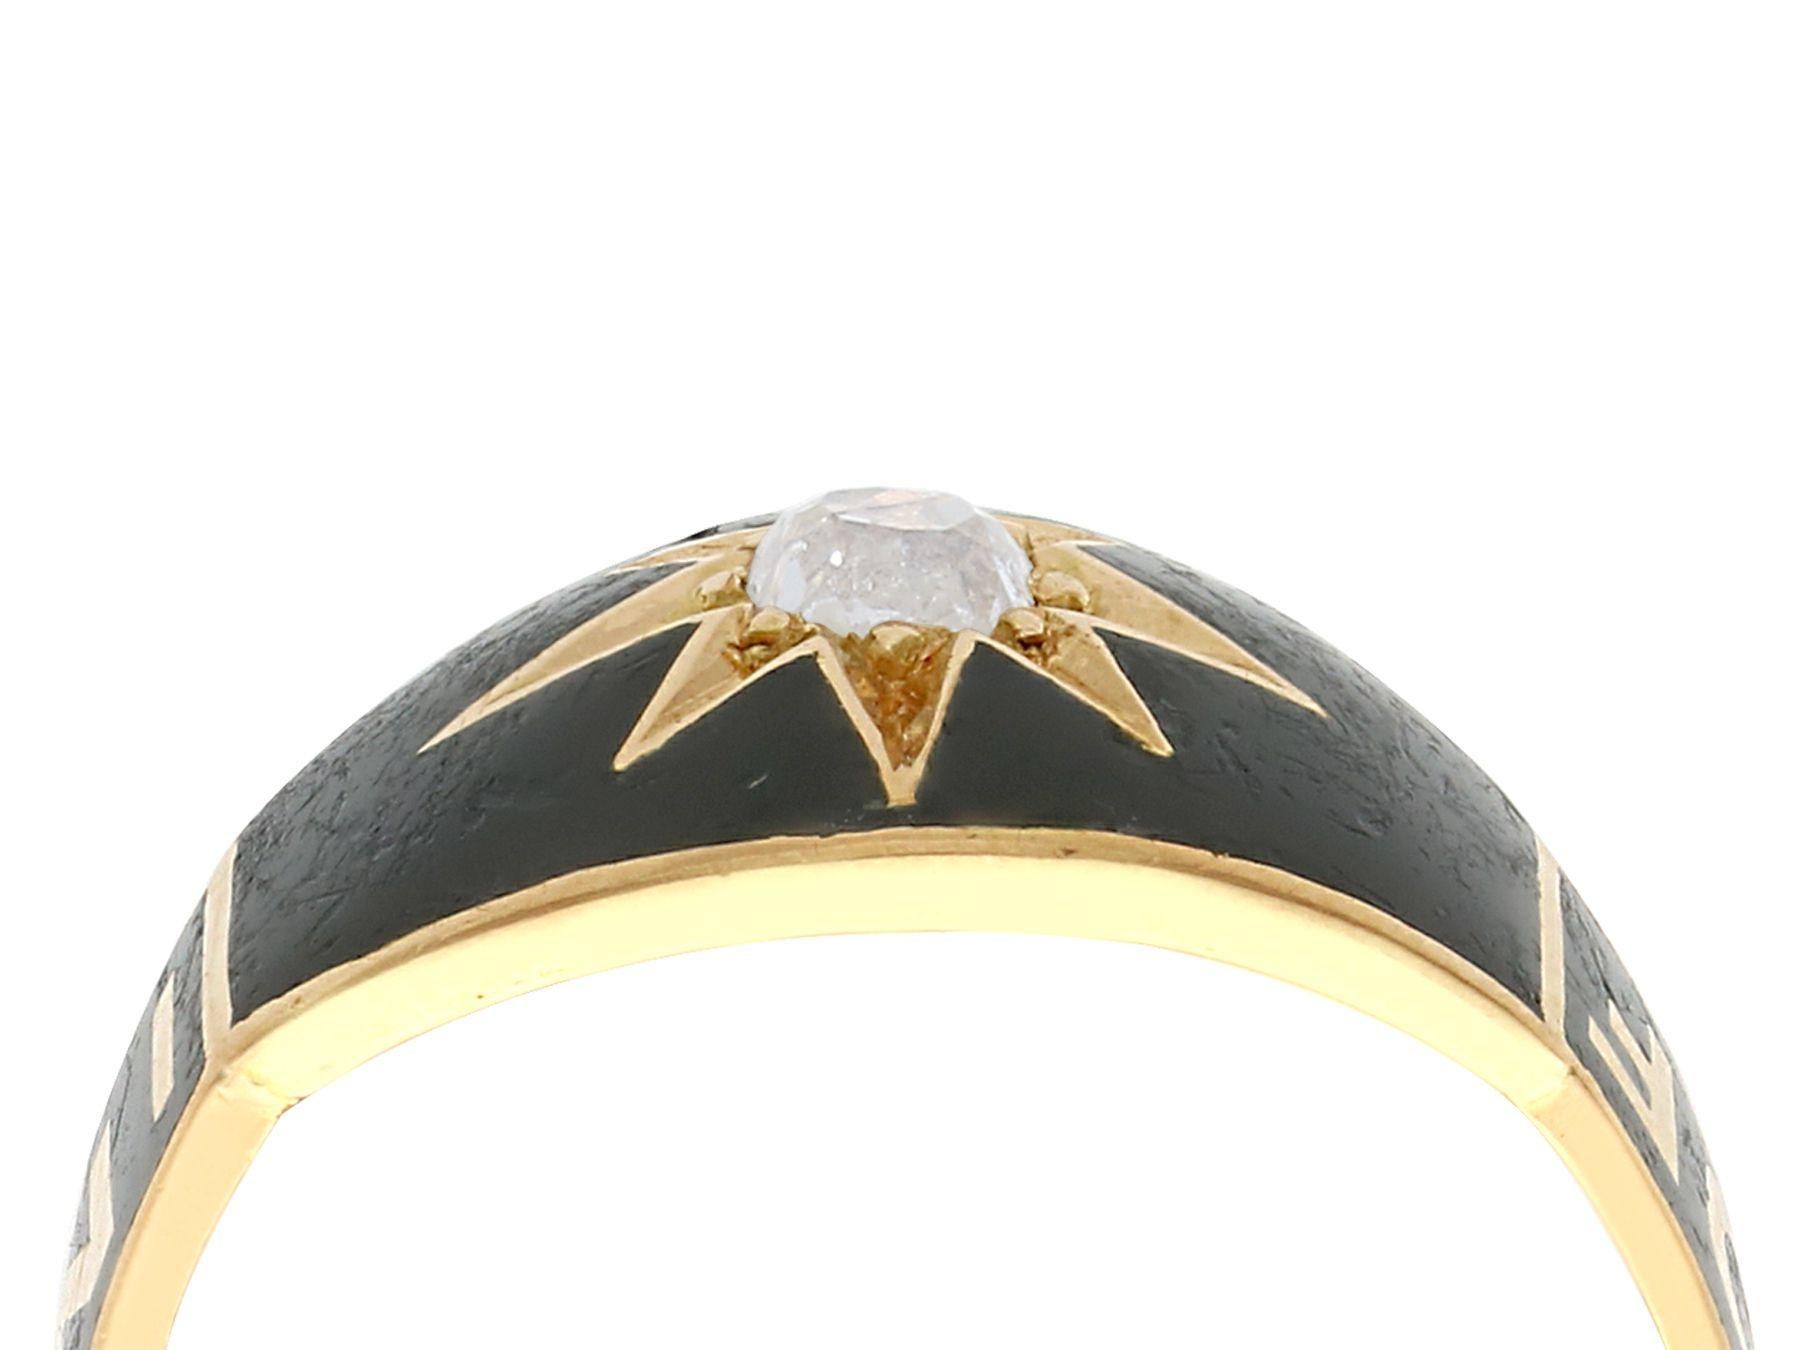 An impressive antique Victorian 0.13 carat diamond and black enamel, 18 karat yellow gold mourning ring; part of our diverse antique jewelry and estate jewelry collections.

This fine and impressive Victorian mourning ring has been crafted in 18k